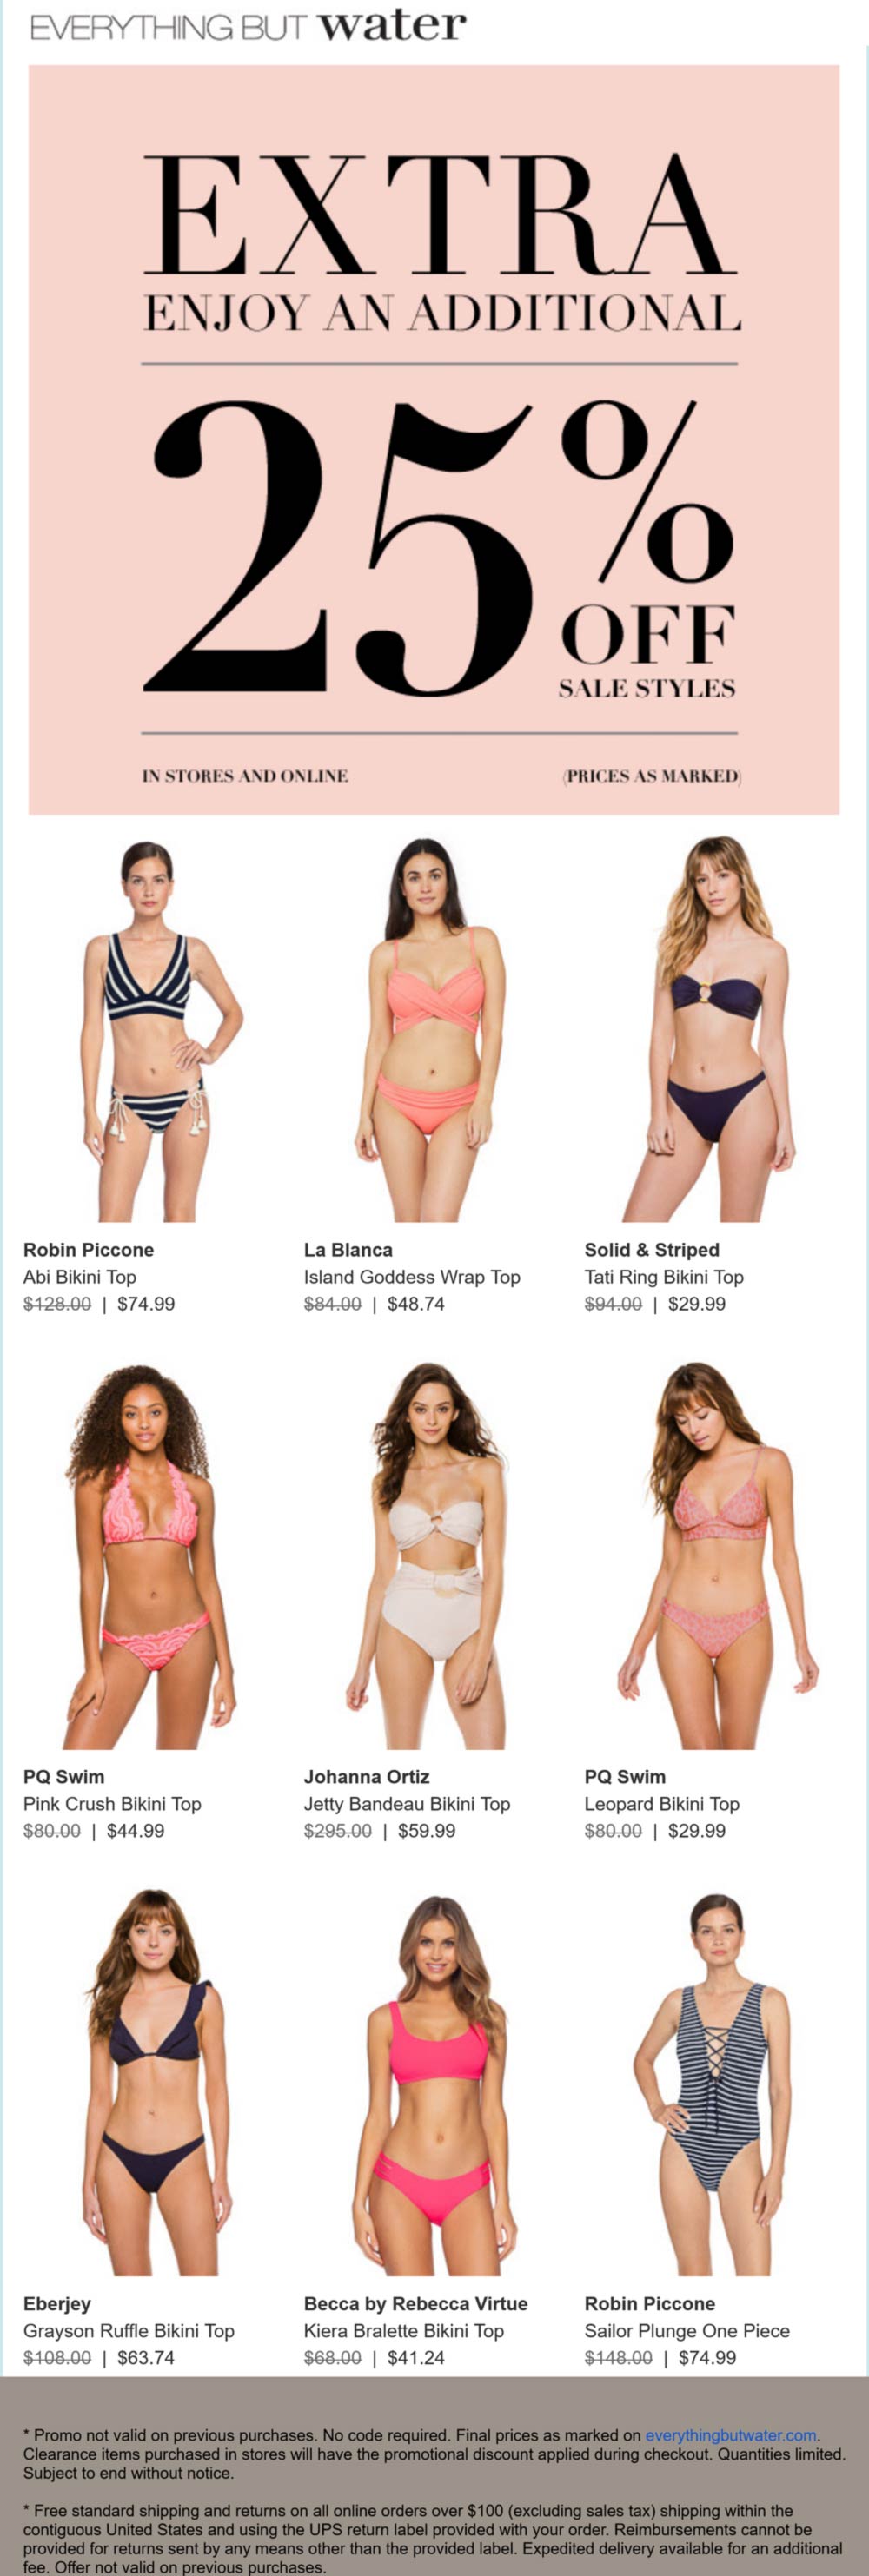 Everything But Water stores Coupon  Extra 25% off swimwear at Everything But Water, ditto online #everythingbutwater 